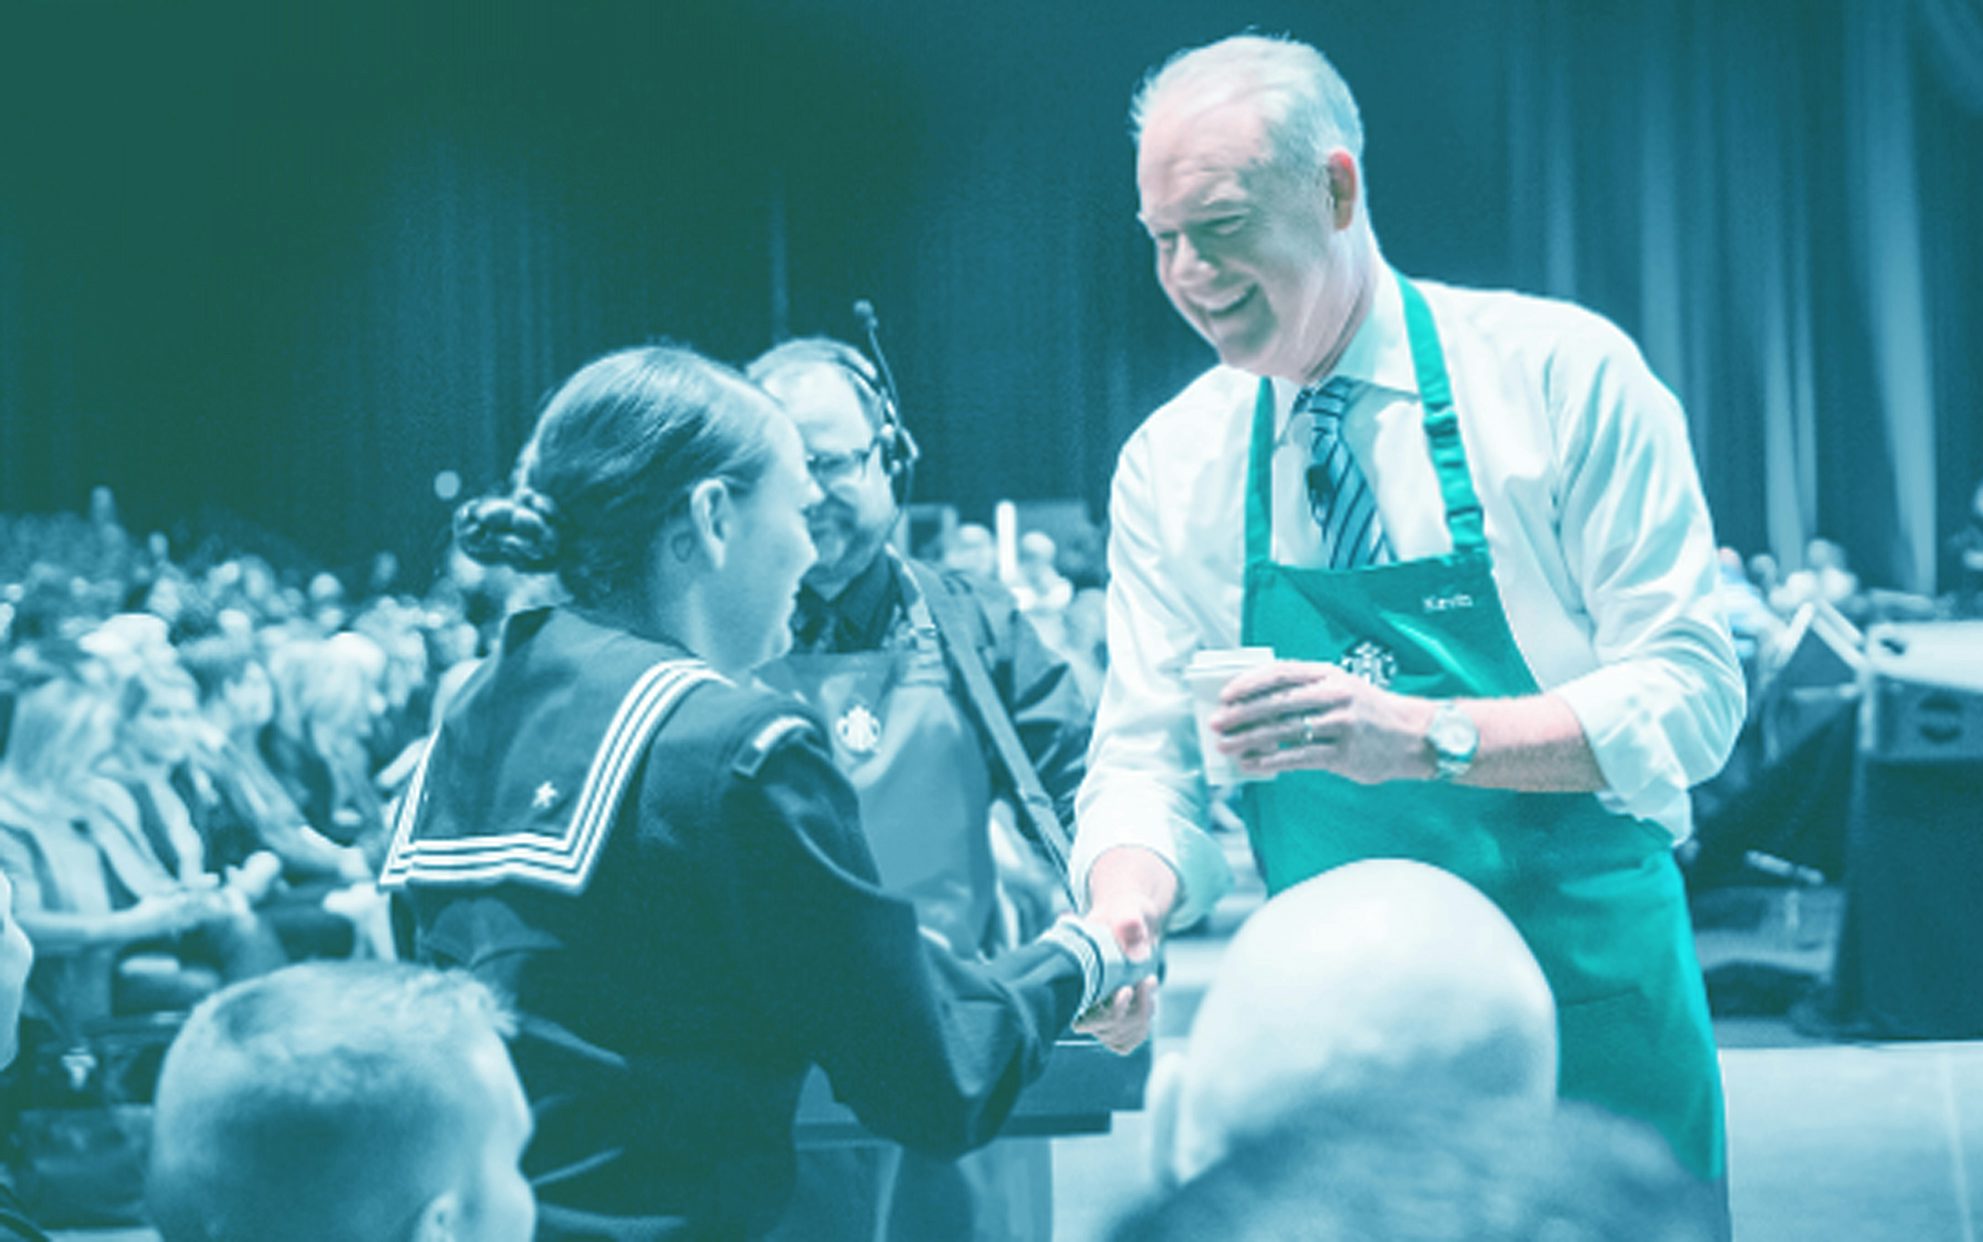 How Starbucks Uses AI and Innovation to Create Their “Third Place” Competitive Advantage